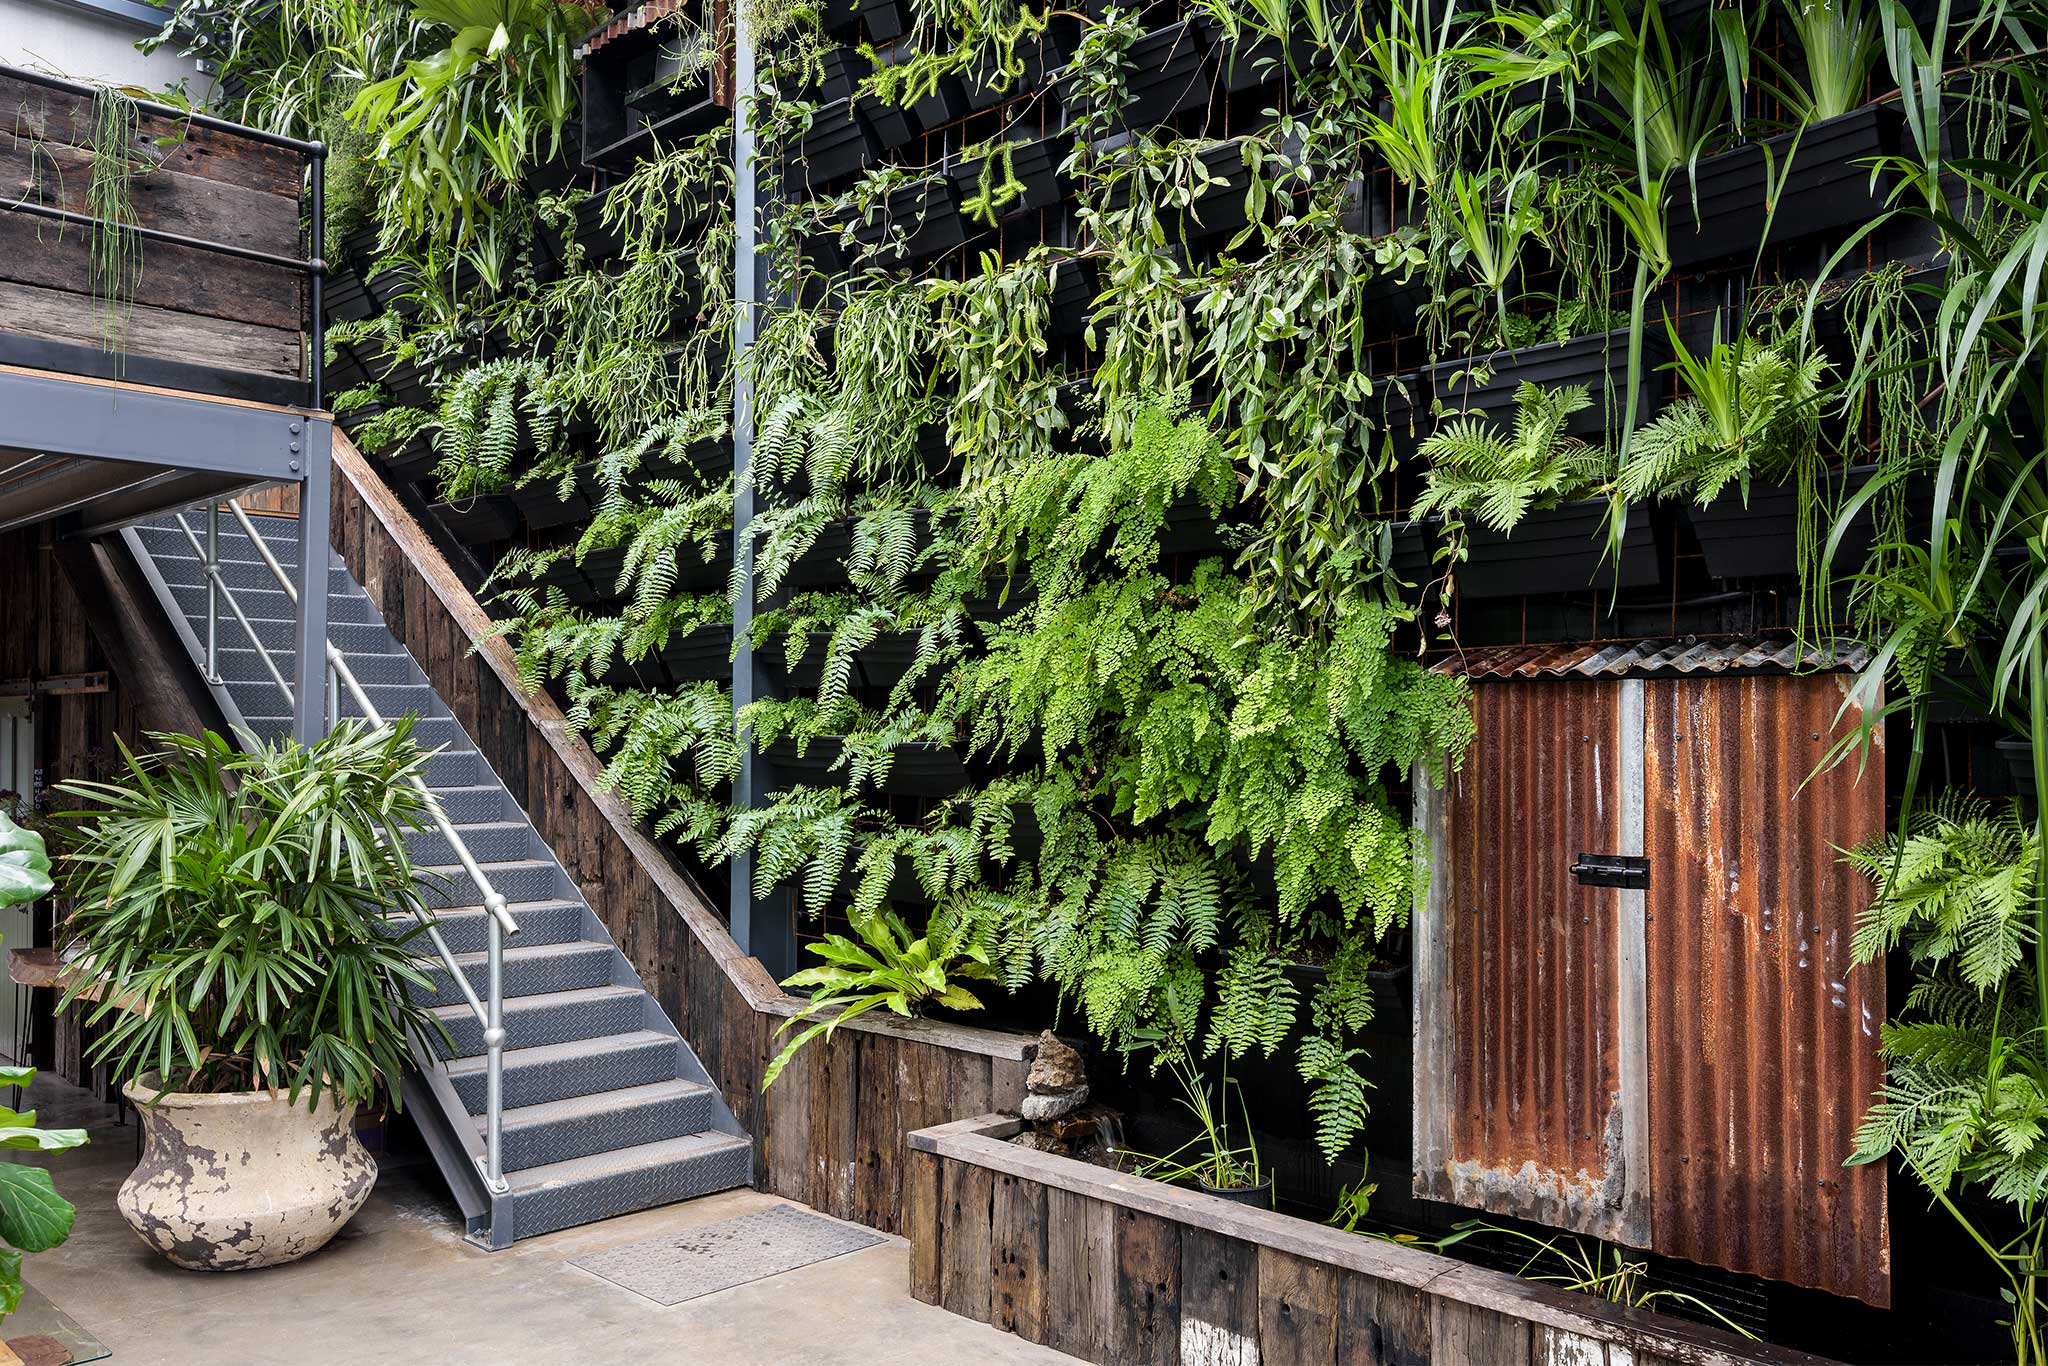 Plant Wall Commercial Interior Fitout Central Coast - Project "MBS Green Giant" - plant wall and mezzanine staircase with rusted corrugated iron mounted unit and recycled railway sleeper wall